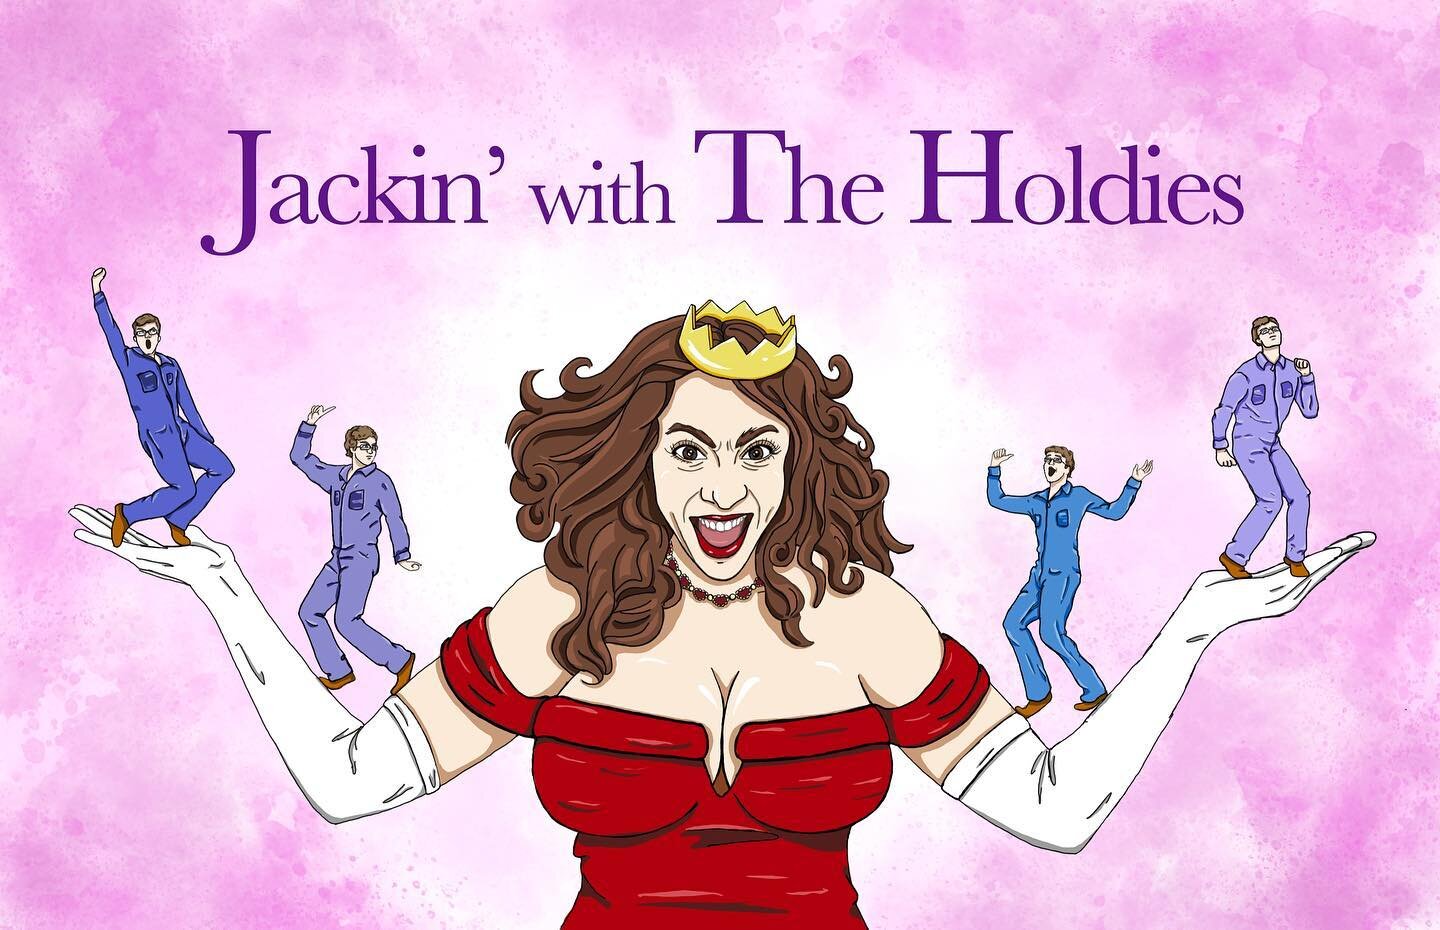 Did some gorgeous, yes I said gorgeous, artwork for the rebrand of @holdenmcn and @jackthatworm twitch stream &ldquo;Jackin&rsquo; with The Holdies&rdquo;. Jackie is sporting Pretty Woman lewks with a deserved golden crown. Her gloved arms support th